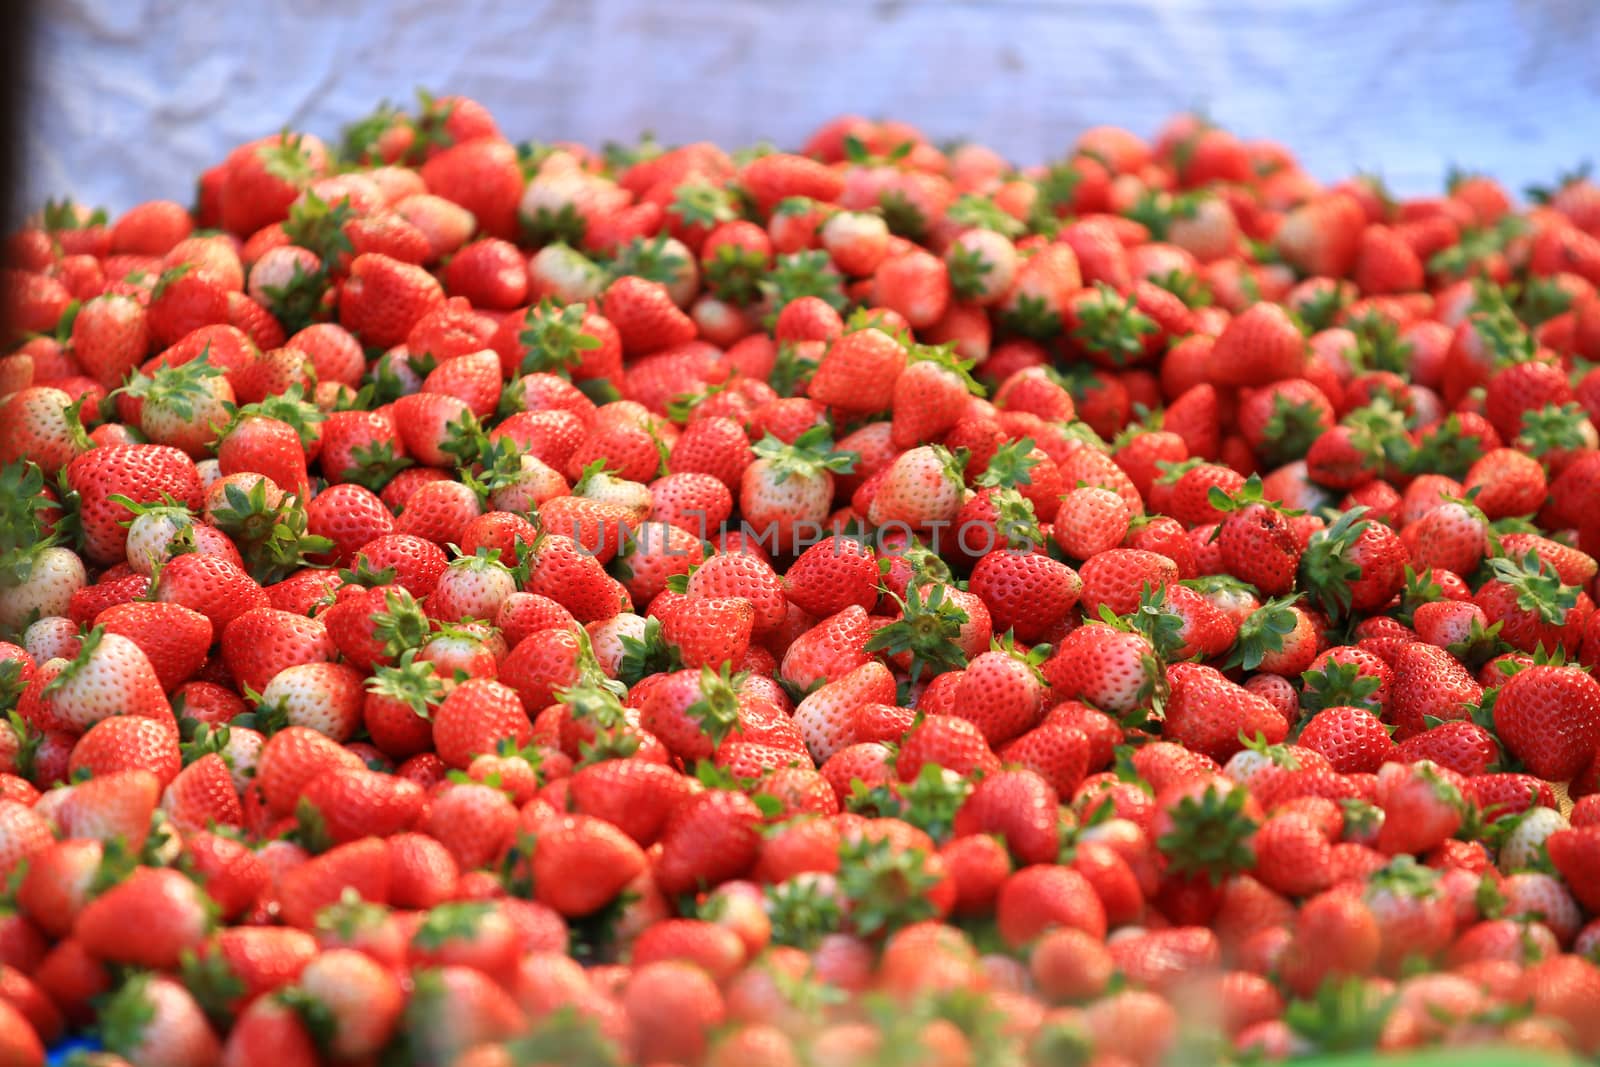 Group of strawberries are on sale.background from freshly harvested strawberries